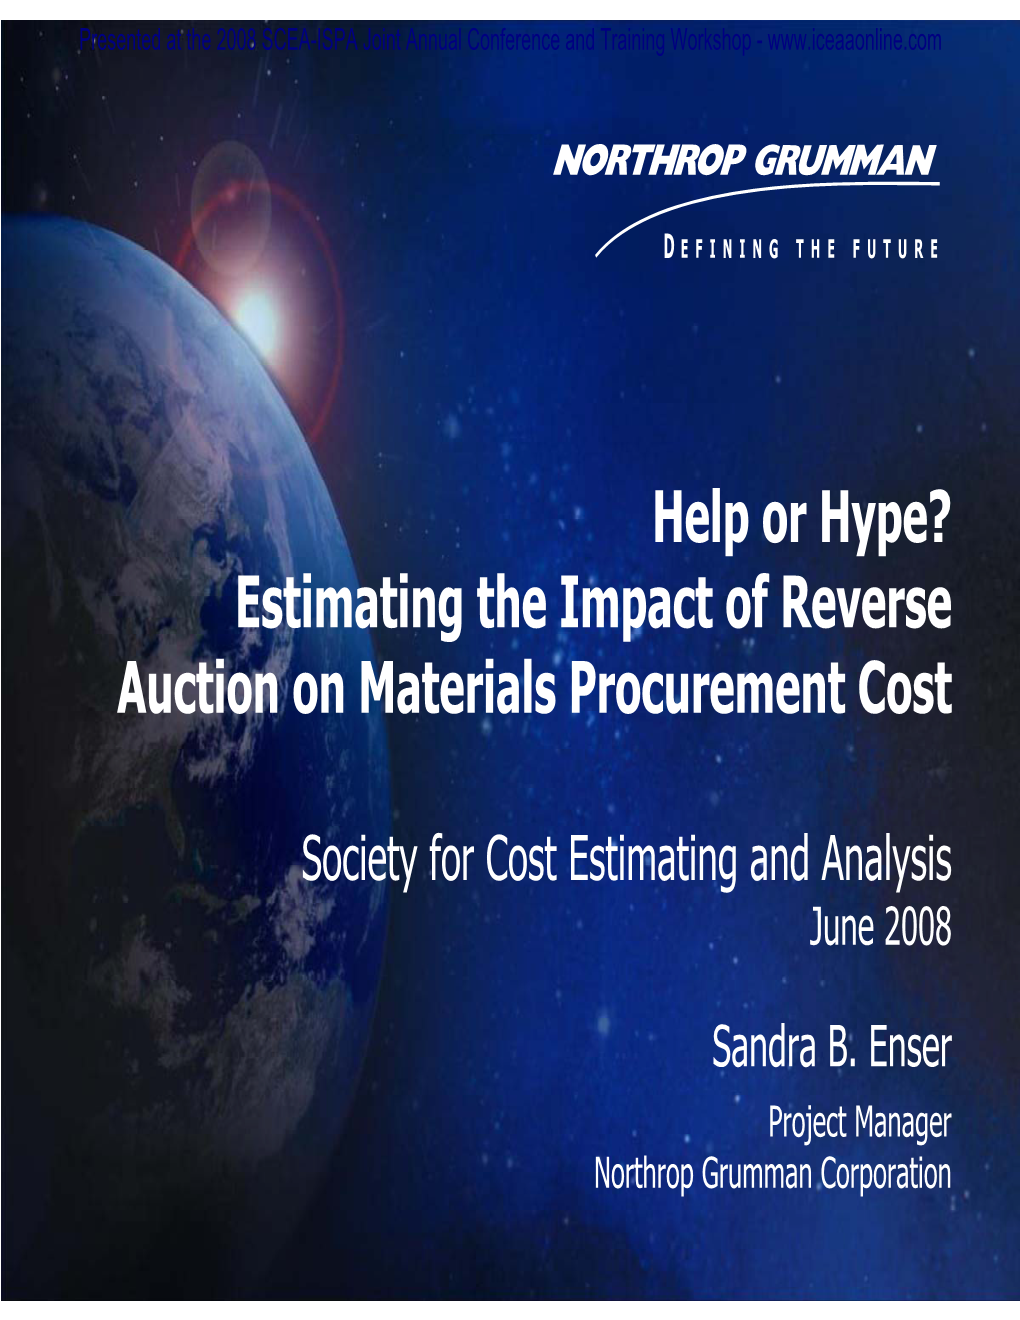 Estimating the Impact of Reverse Auction on Materials Procurement Cost